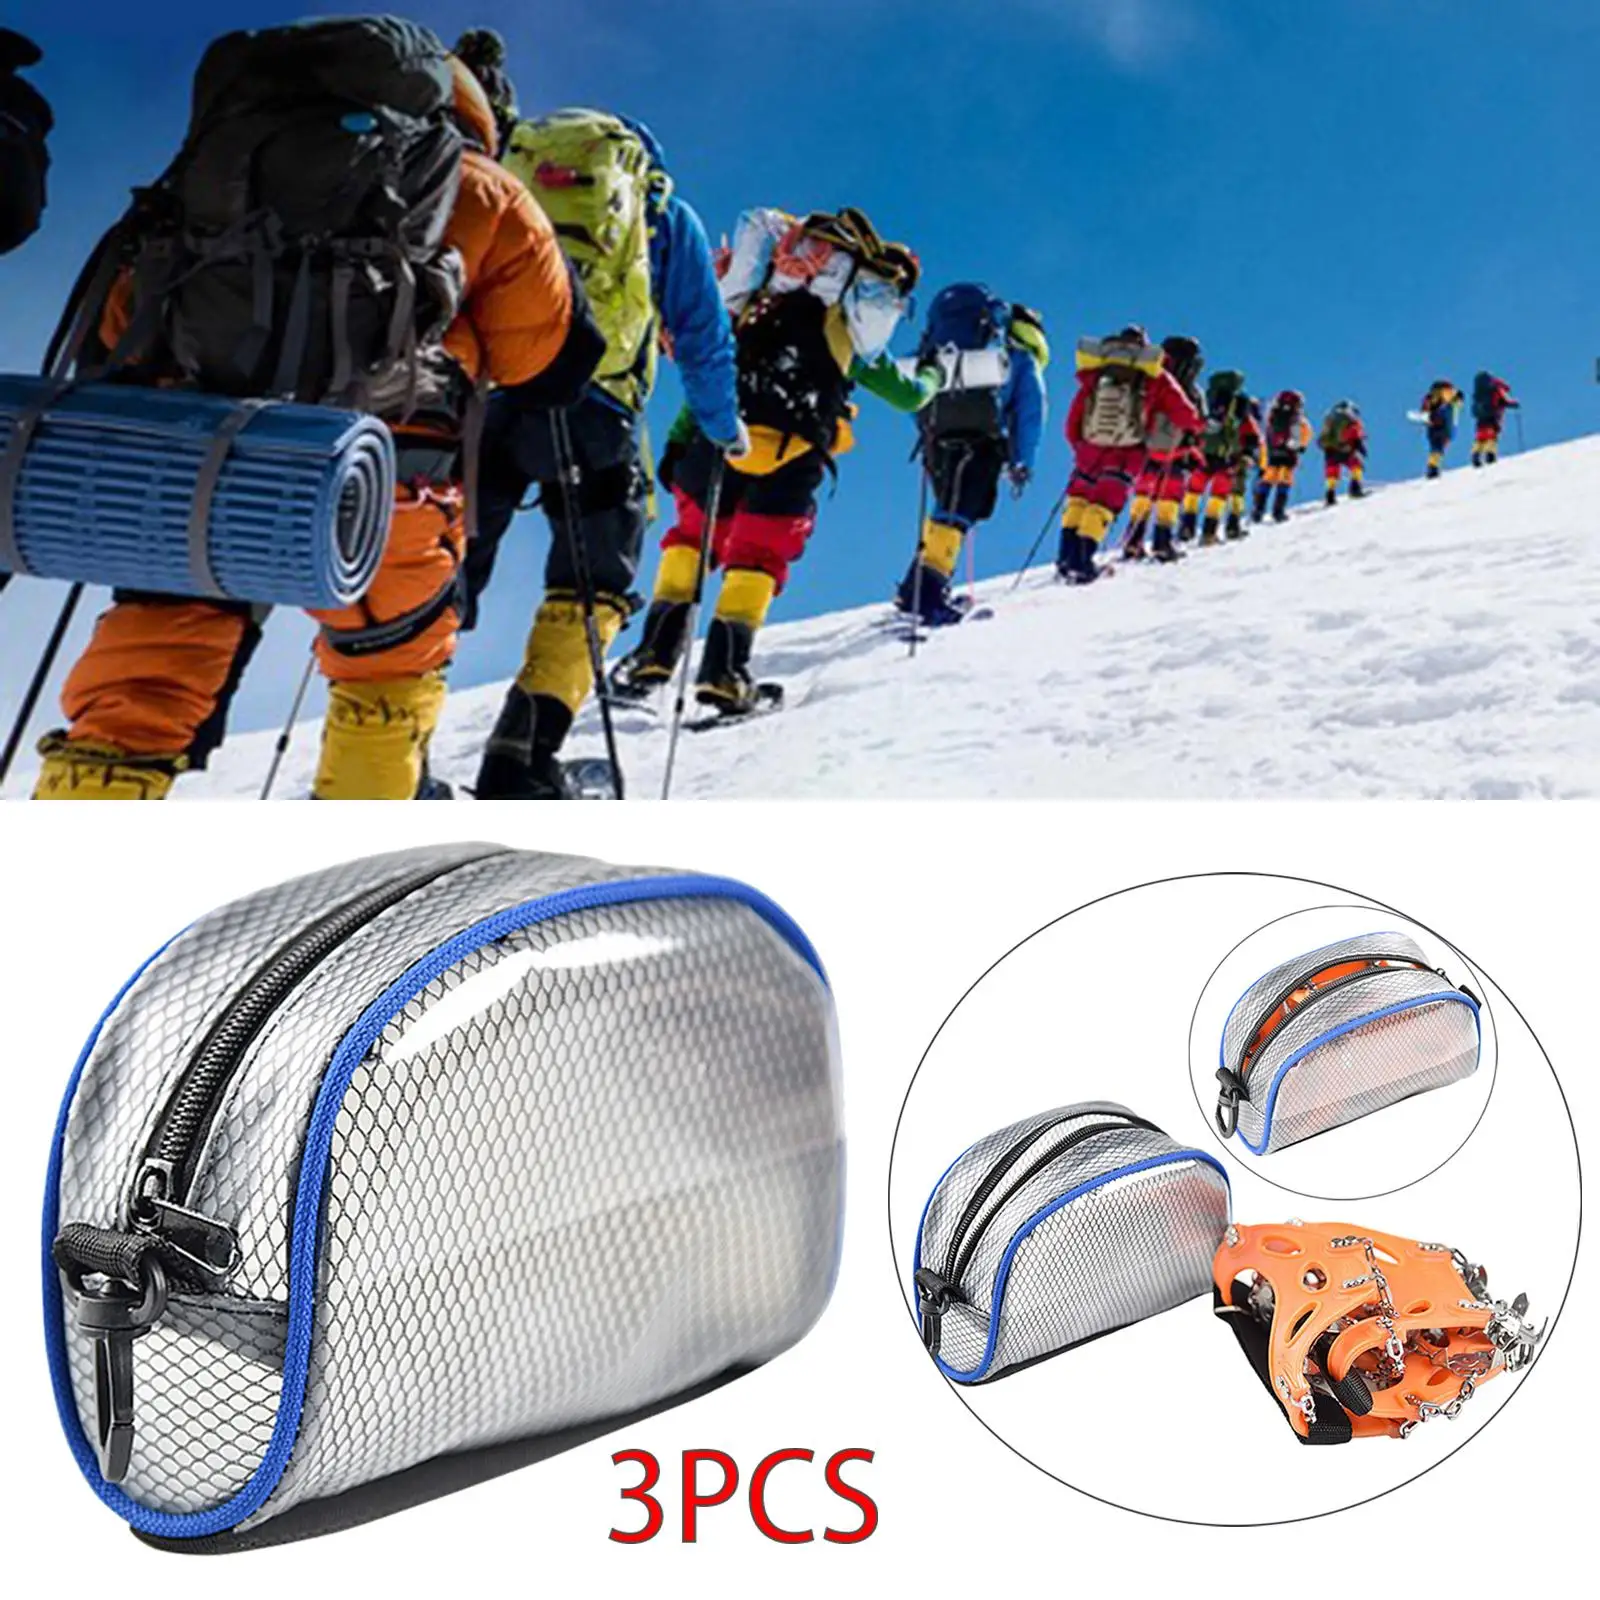 Outdoor Portable Crampon Bag Shoe Bag Cover Shoe Cover Ultralight Waterproof Holders for Walking Adventure Jogging Hiking Sports